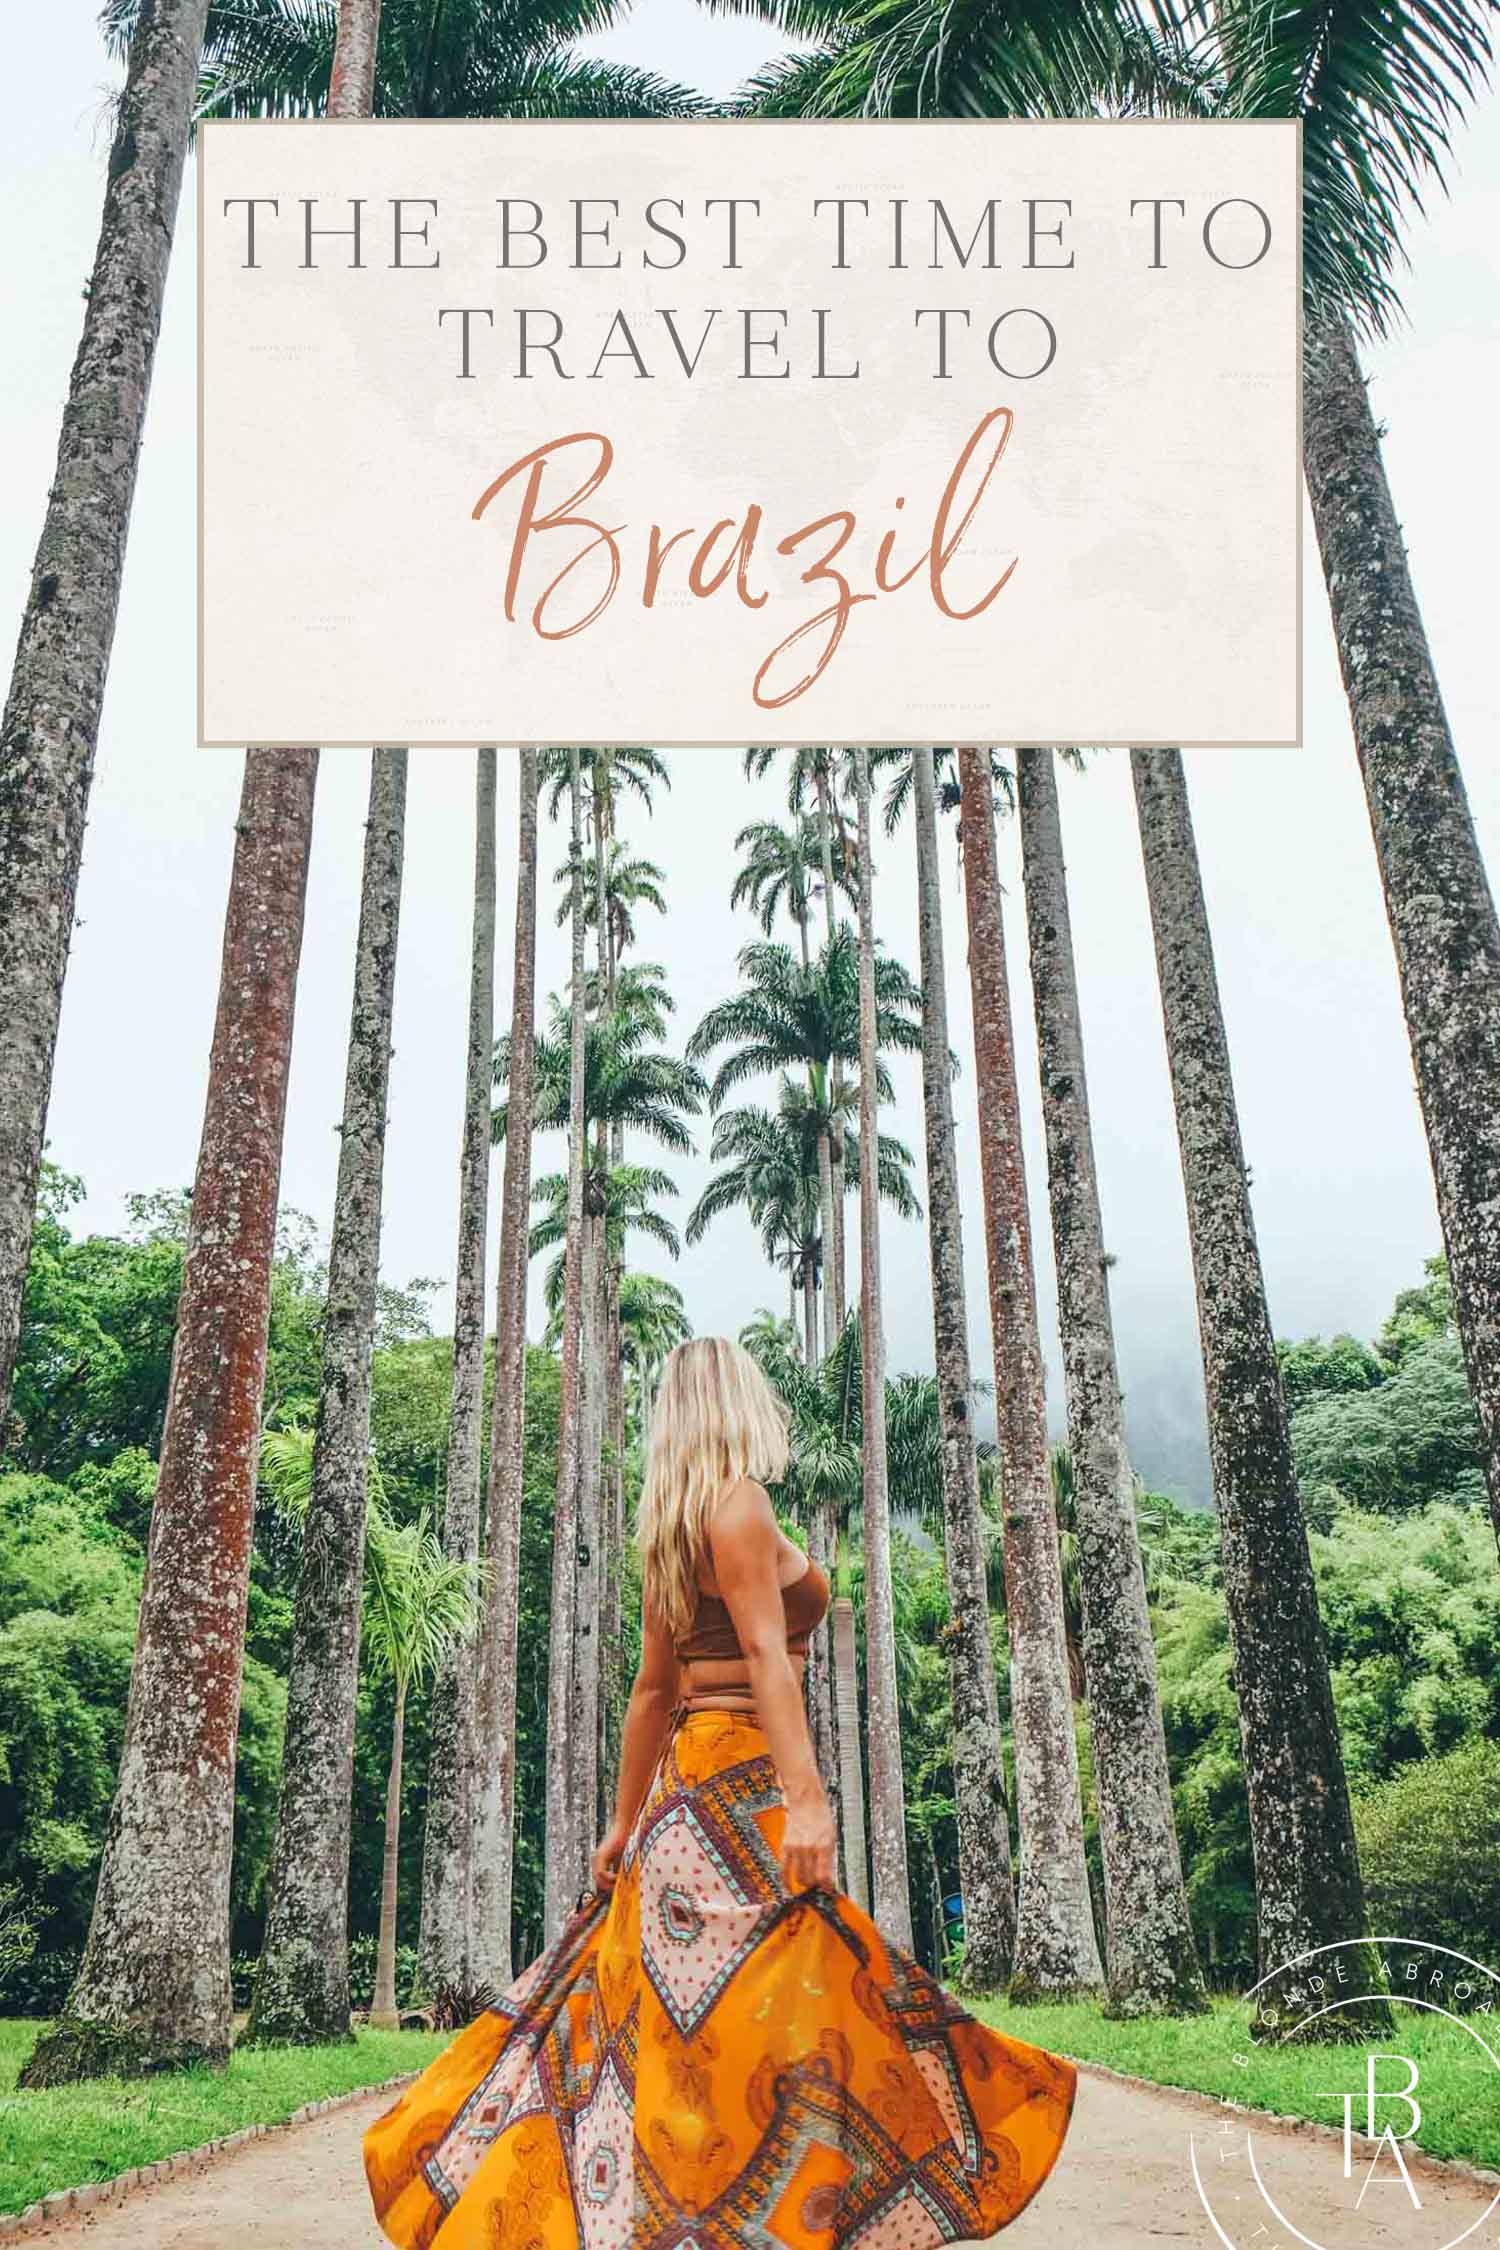 Best Time to Travel to Brazil